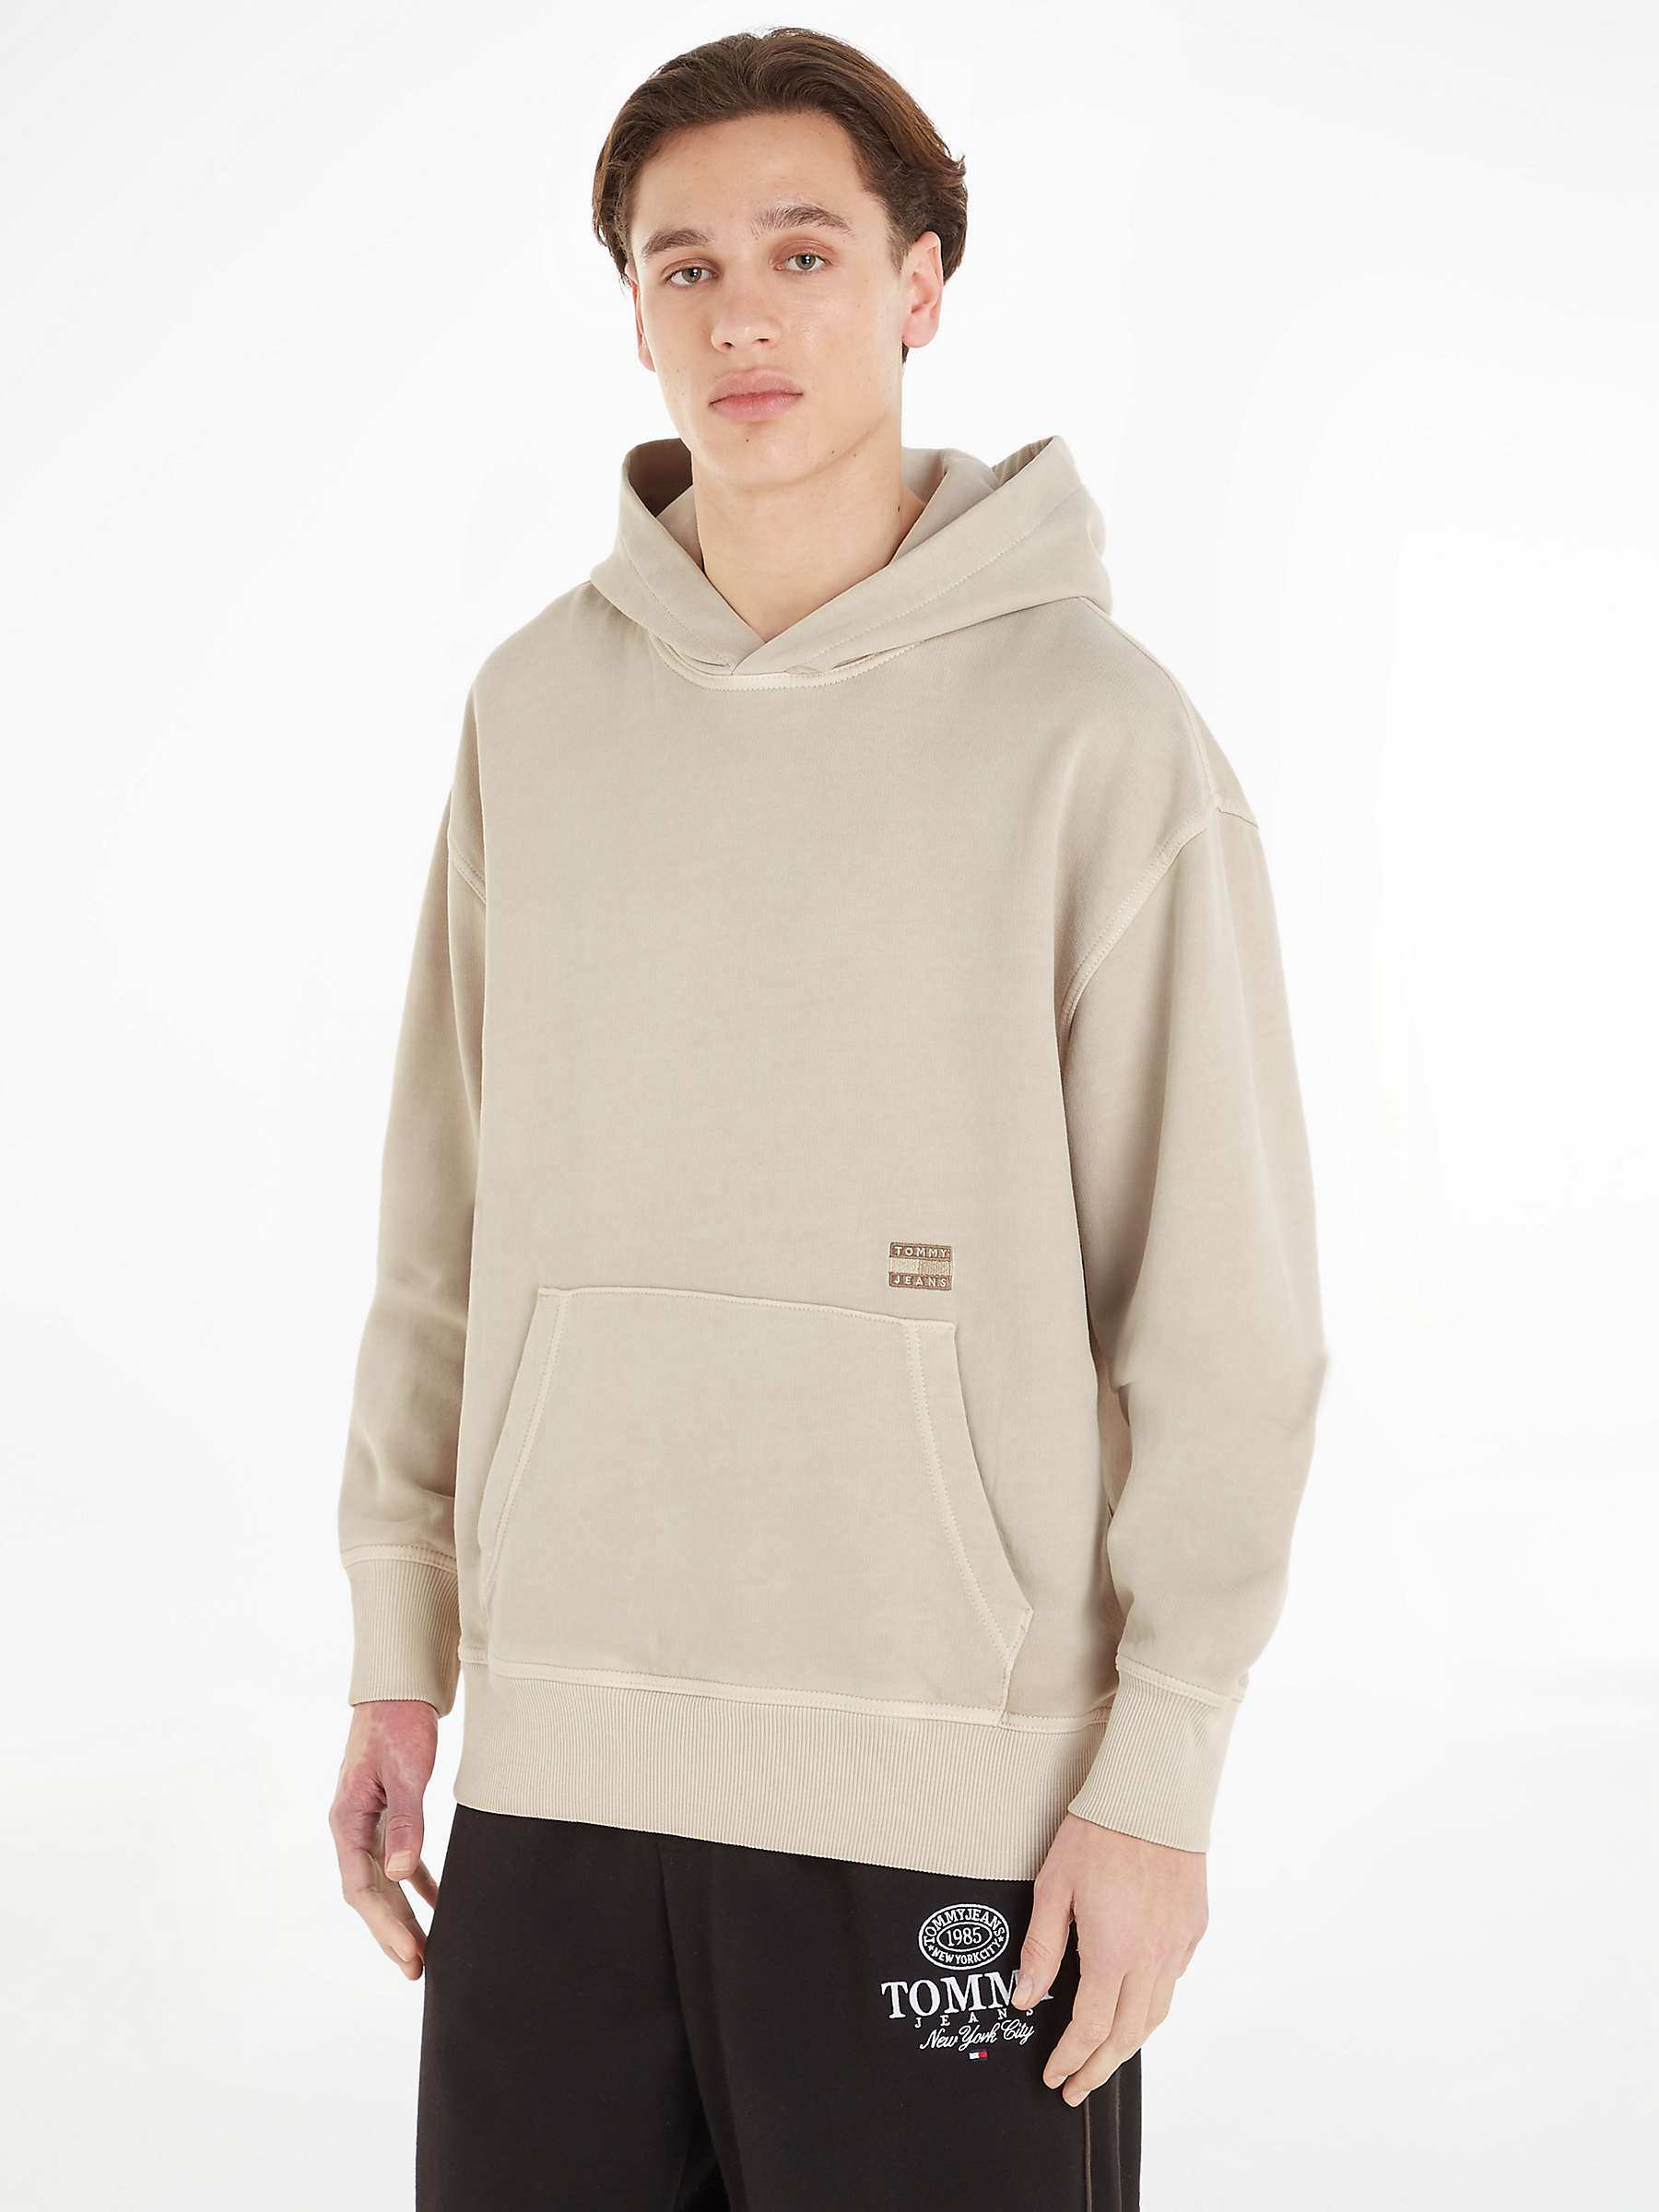 Tommy Hilfiger Tonal Relaxed Fit Hoodie, Newsprint at John Lewis & Partners